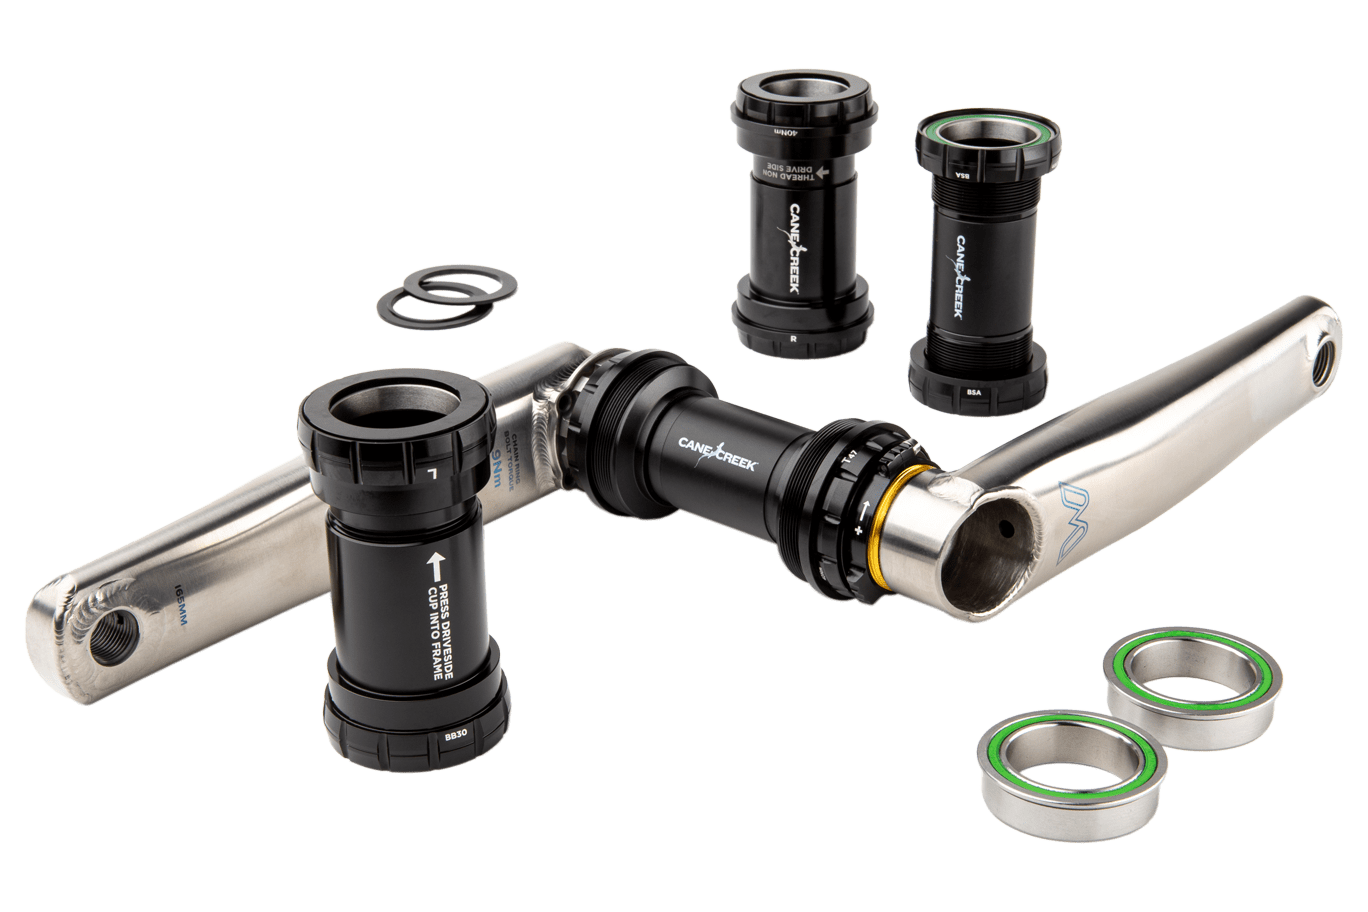 Hellbender 70 bottom bracket family with BB30, BSA and T47 Cups